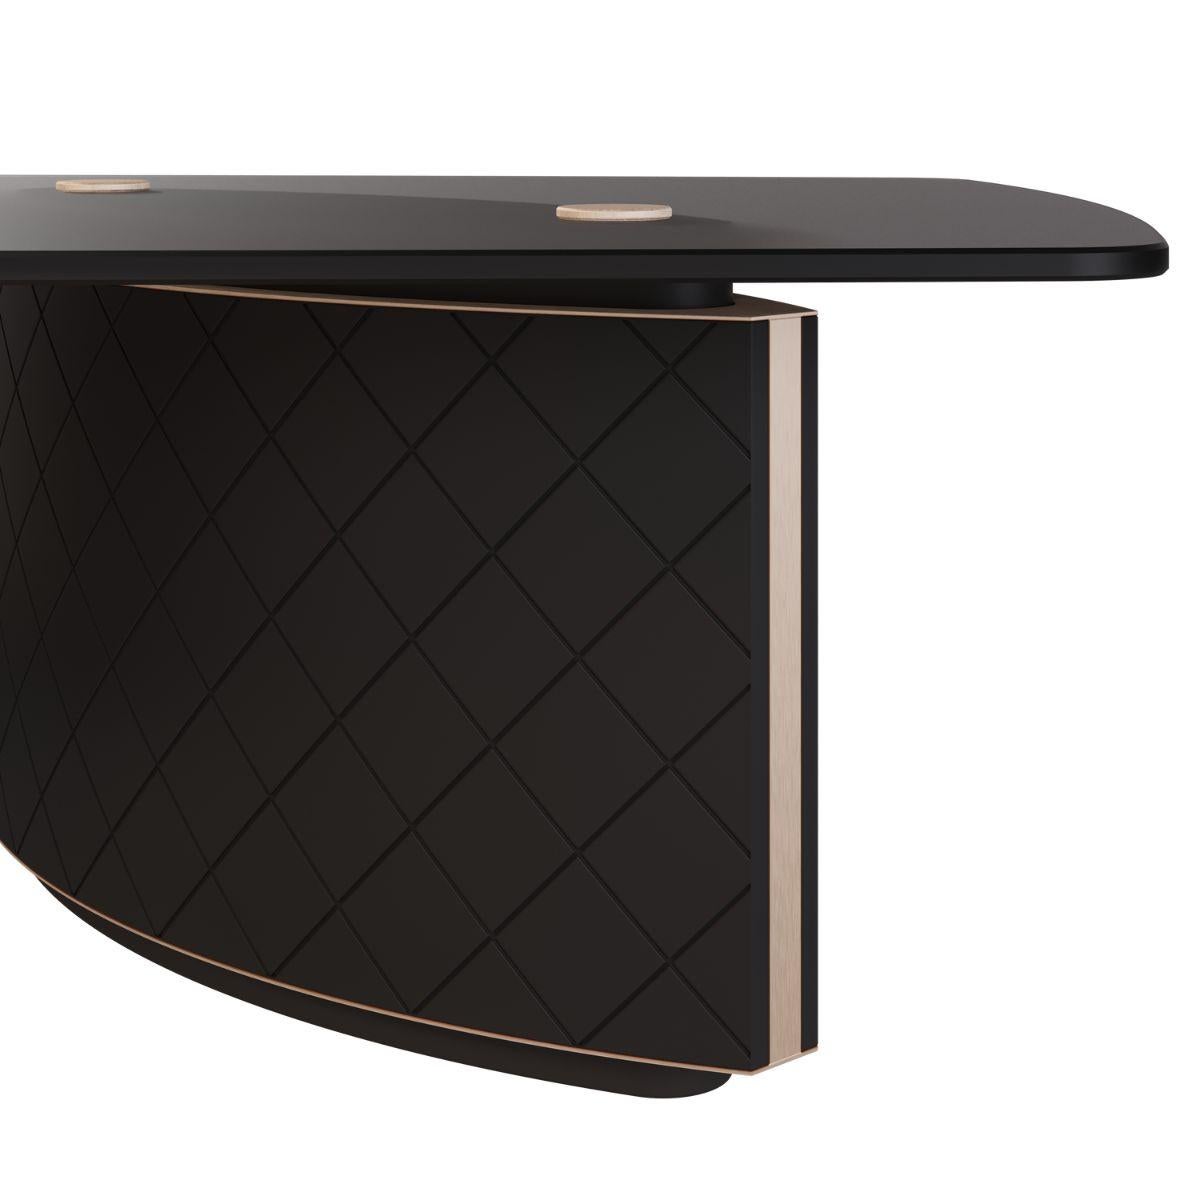 Verve Coffee Table

In essence, the Verve coffee table is a celebration of the vibrancy and potential of life. It's about infusing every moment with passion and enthusiasm. Its structure is made of fiberglass, with an elegant frosted glass top and